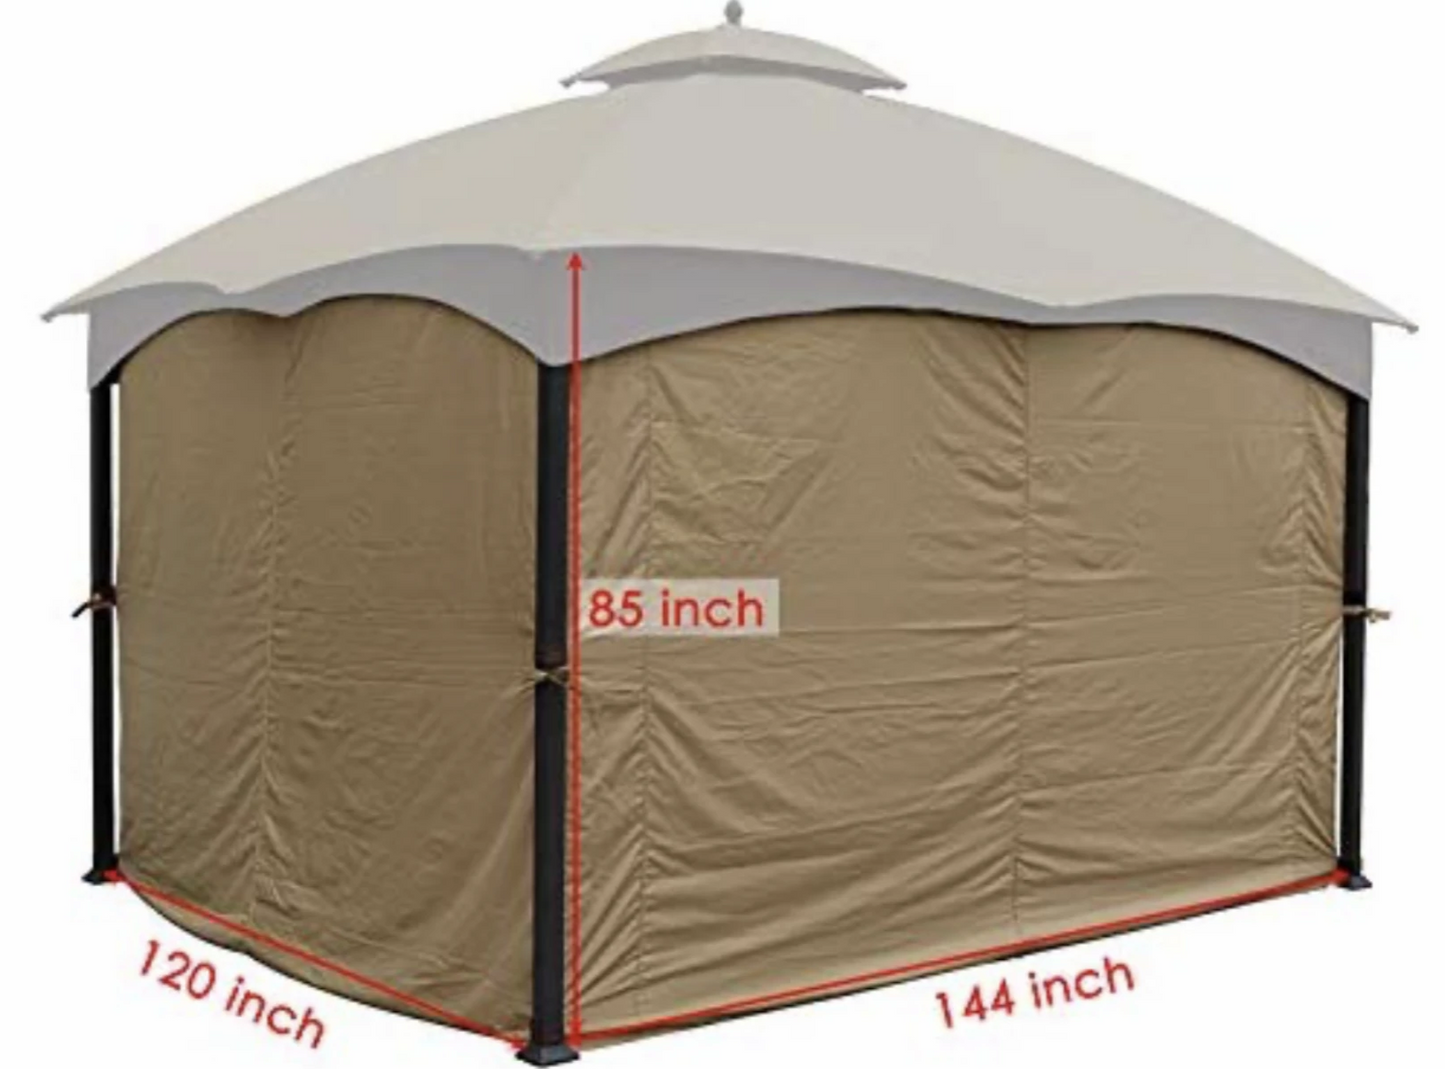 Lowes Allen and Roth 10 X 12 GF12S004B & GF12S004B1 Gazebo Refresh Bundle Canopy,Bug Screen,Curtain All in one Package